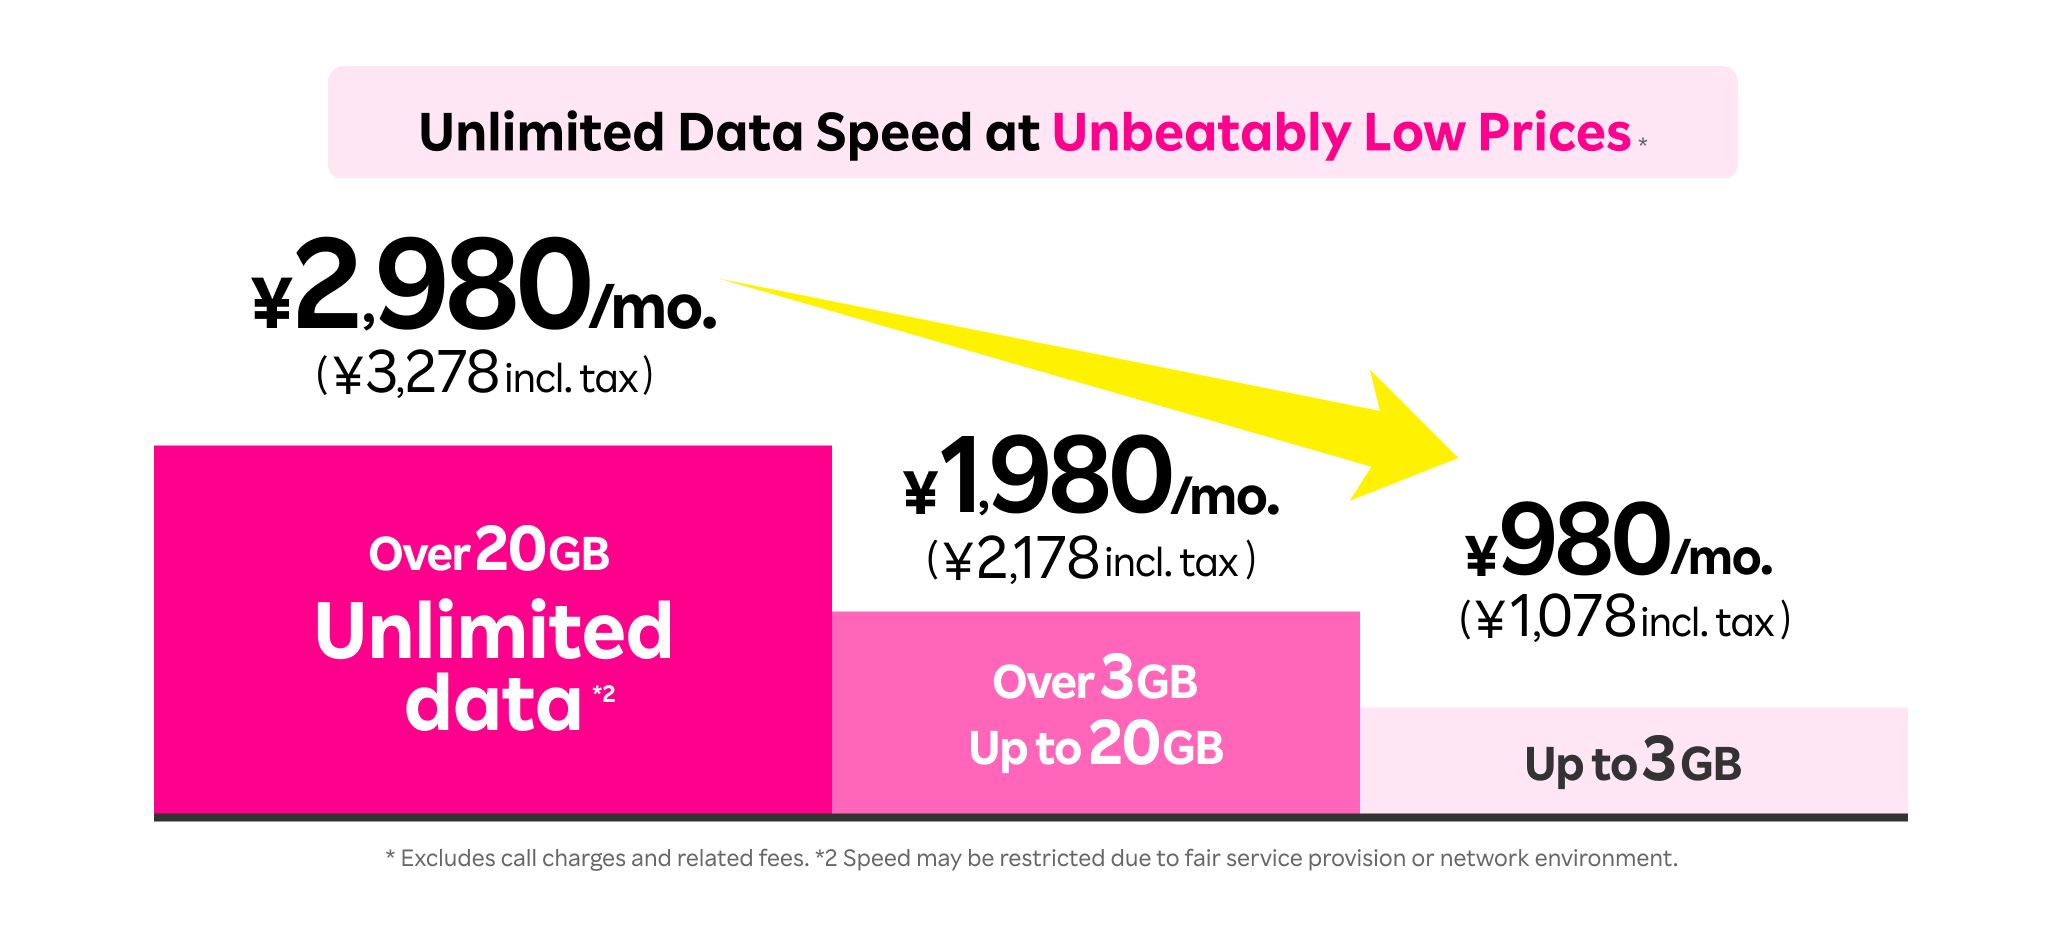 Unlimited data speed at unbeatably low prices even without the family discount applied, 980 yen/mo. (1,078 yen incl. tax) for up to 3GB or 2,980 yen/mo. (3,278 yen incl. tax) for unlimited high-speed data.